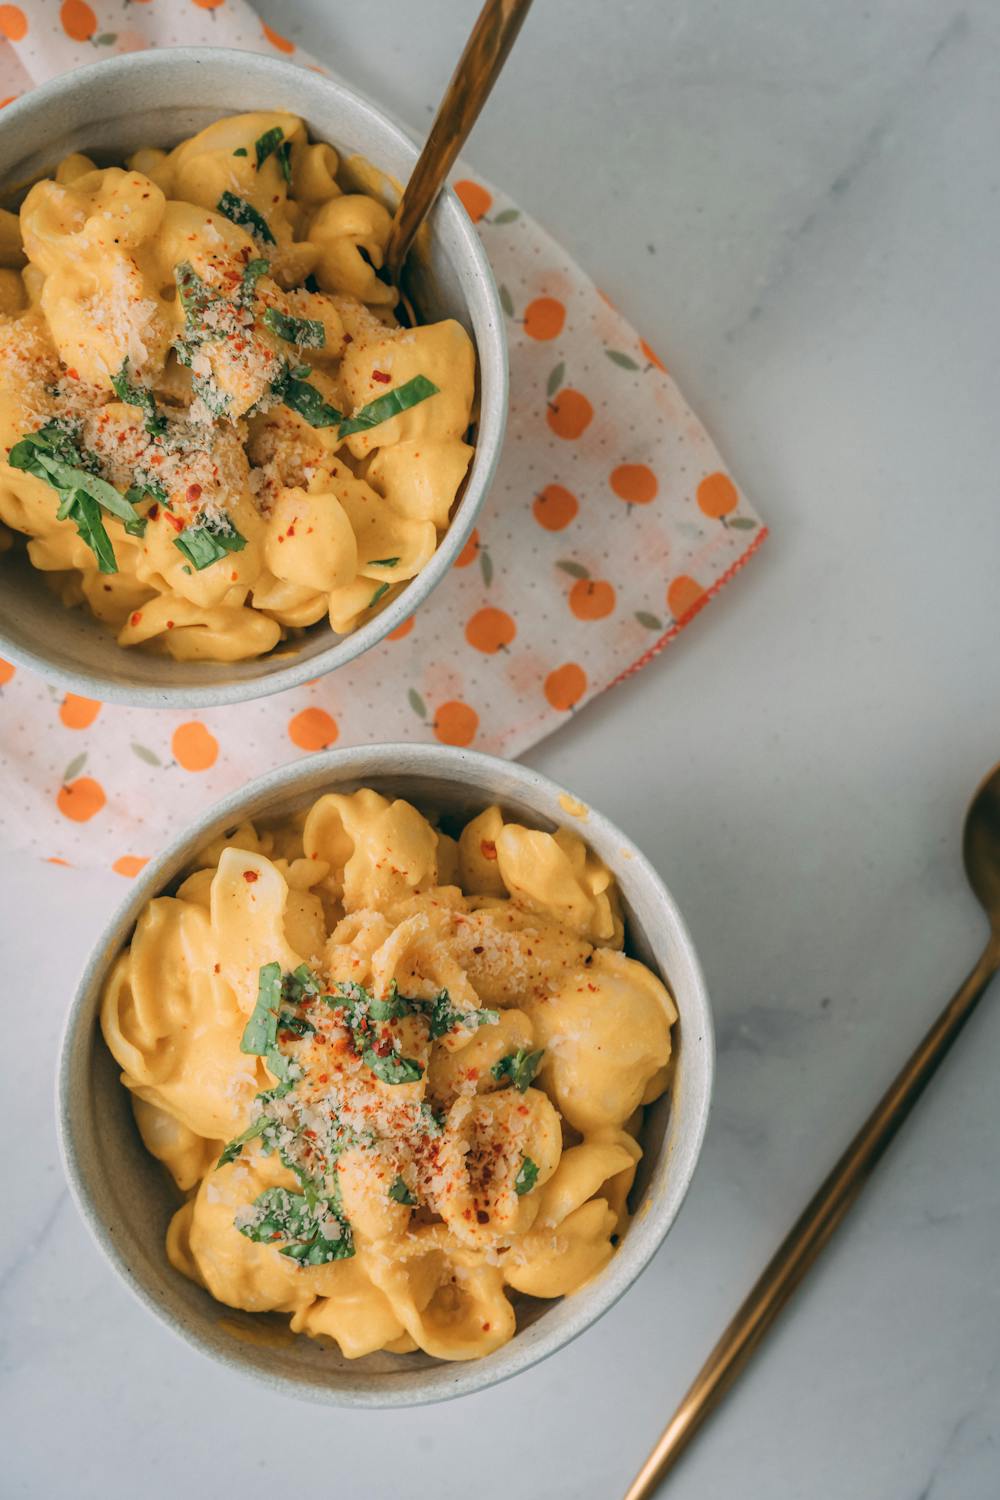 Everything You Need to Make Decadent Mac & Cheese at Home